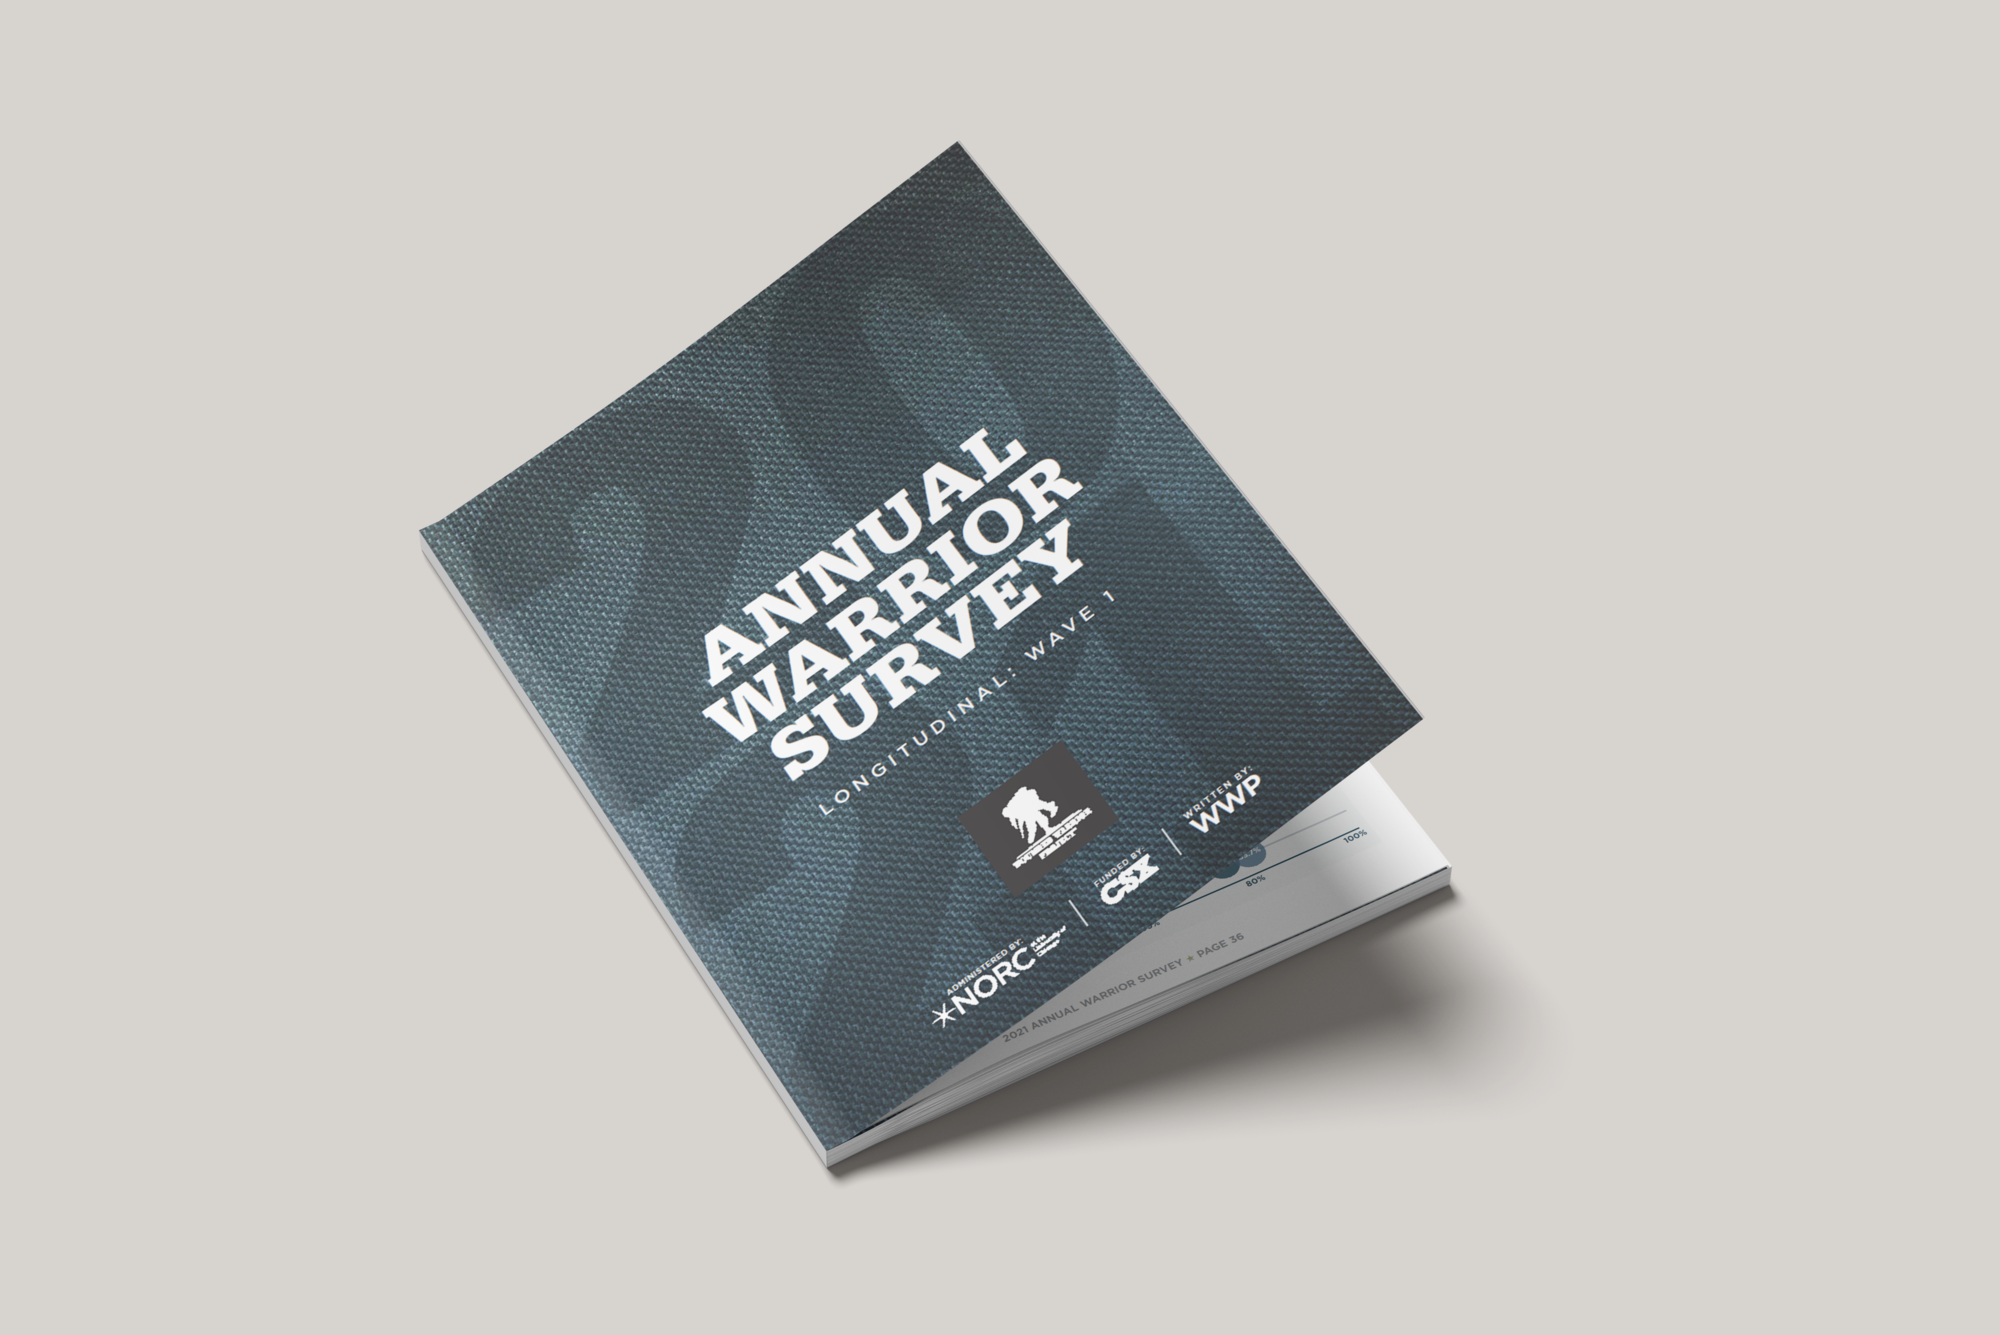 annual warrior survey results from the wounded warrior project